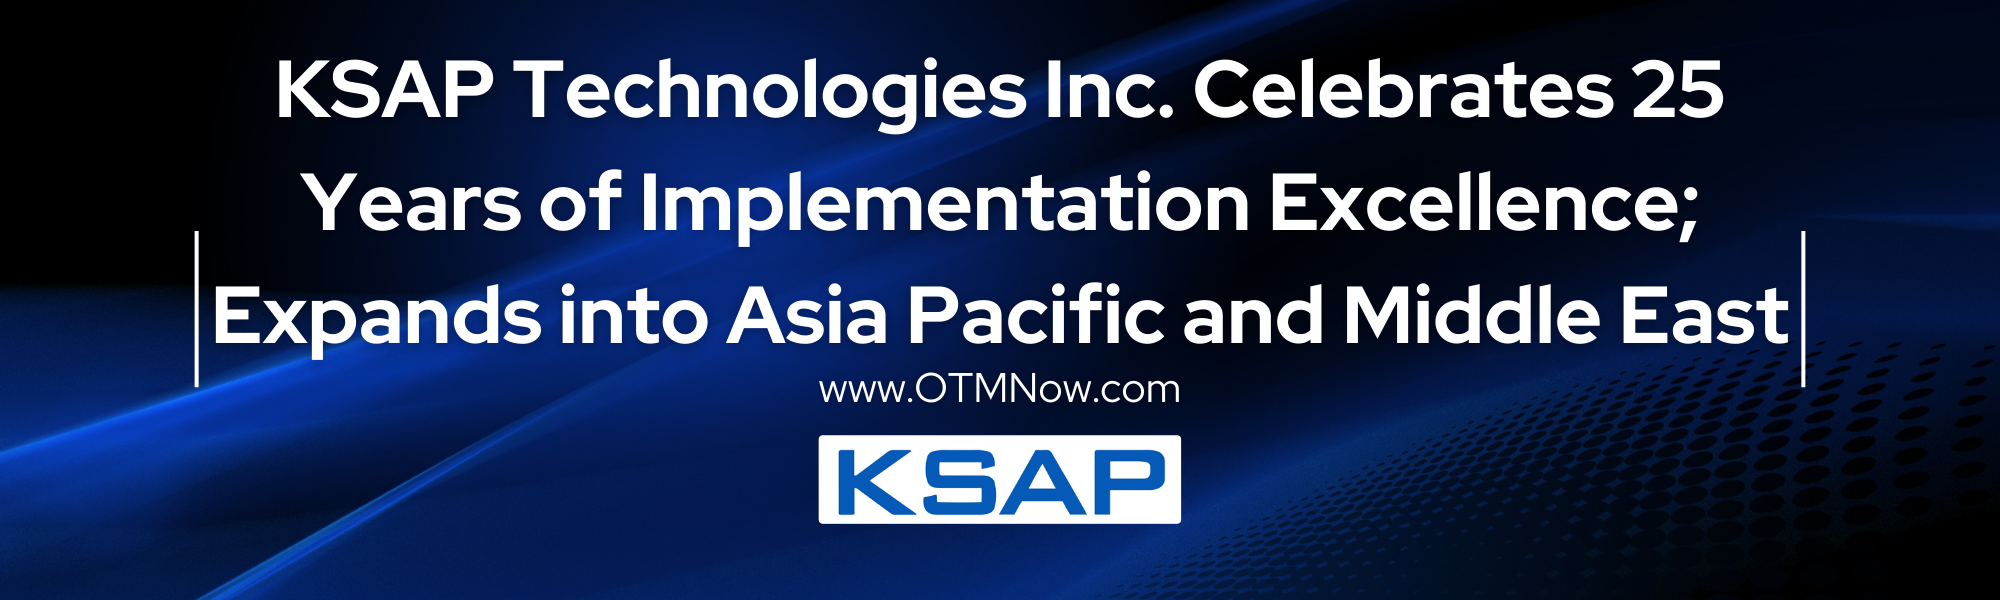 KSAP Technologies Inc. Celebrates 25 Years of Implementation Excellence; Expands into Asia Pacific and Middle East